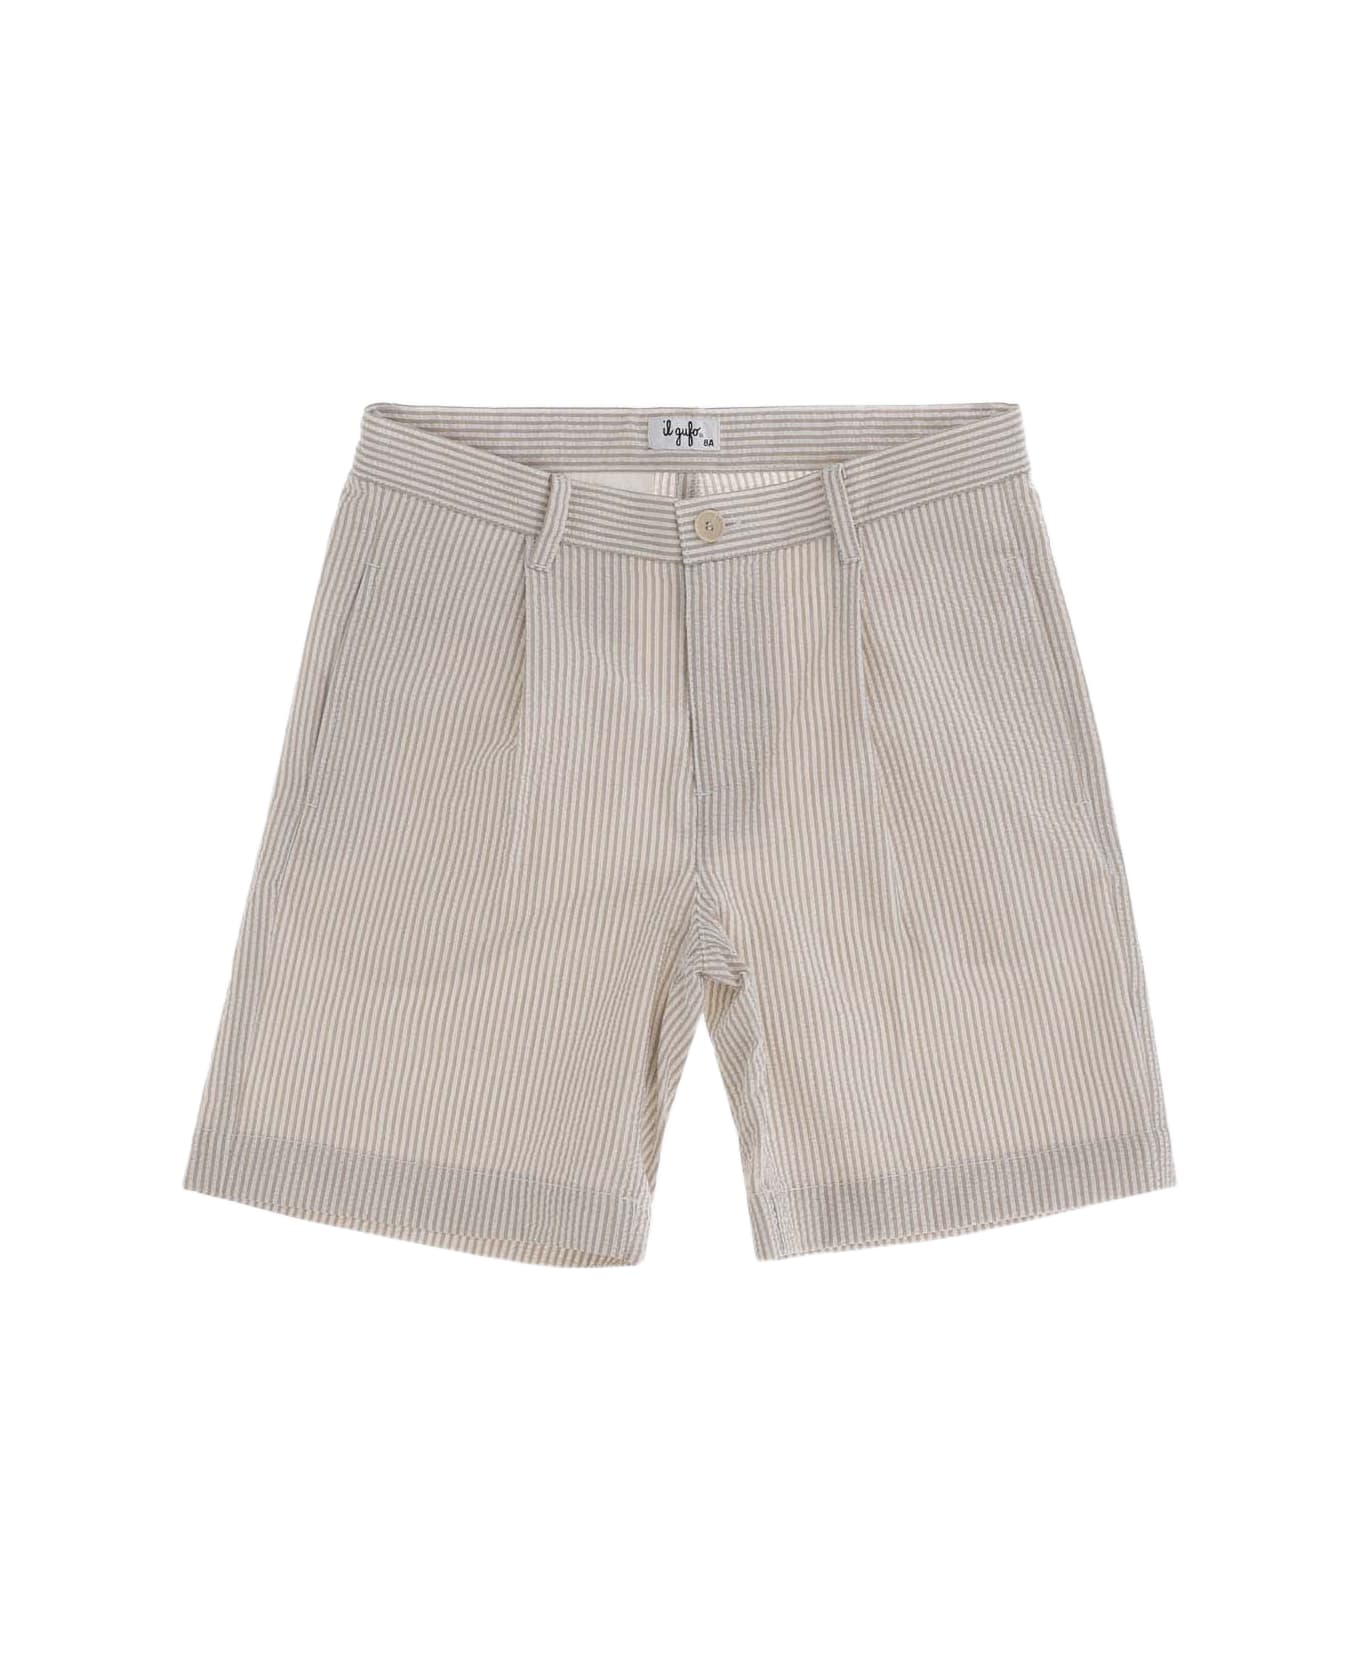 Il Gufo Cotton Short Pants With Striped Pattern - Beige ボトムス